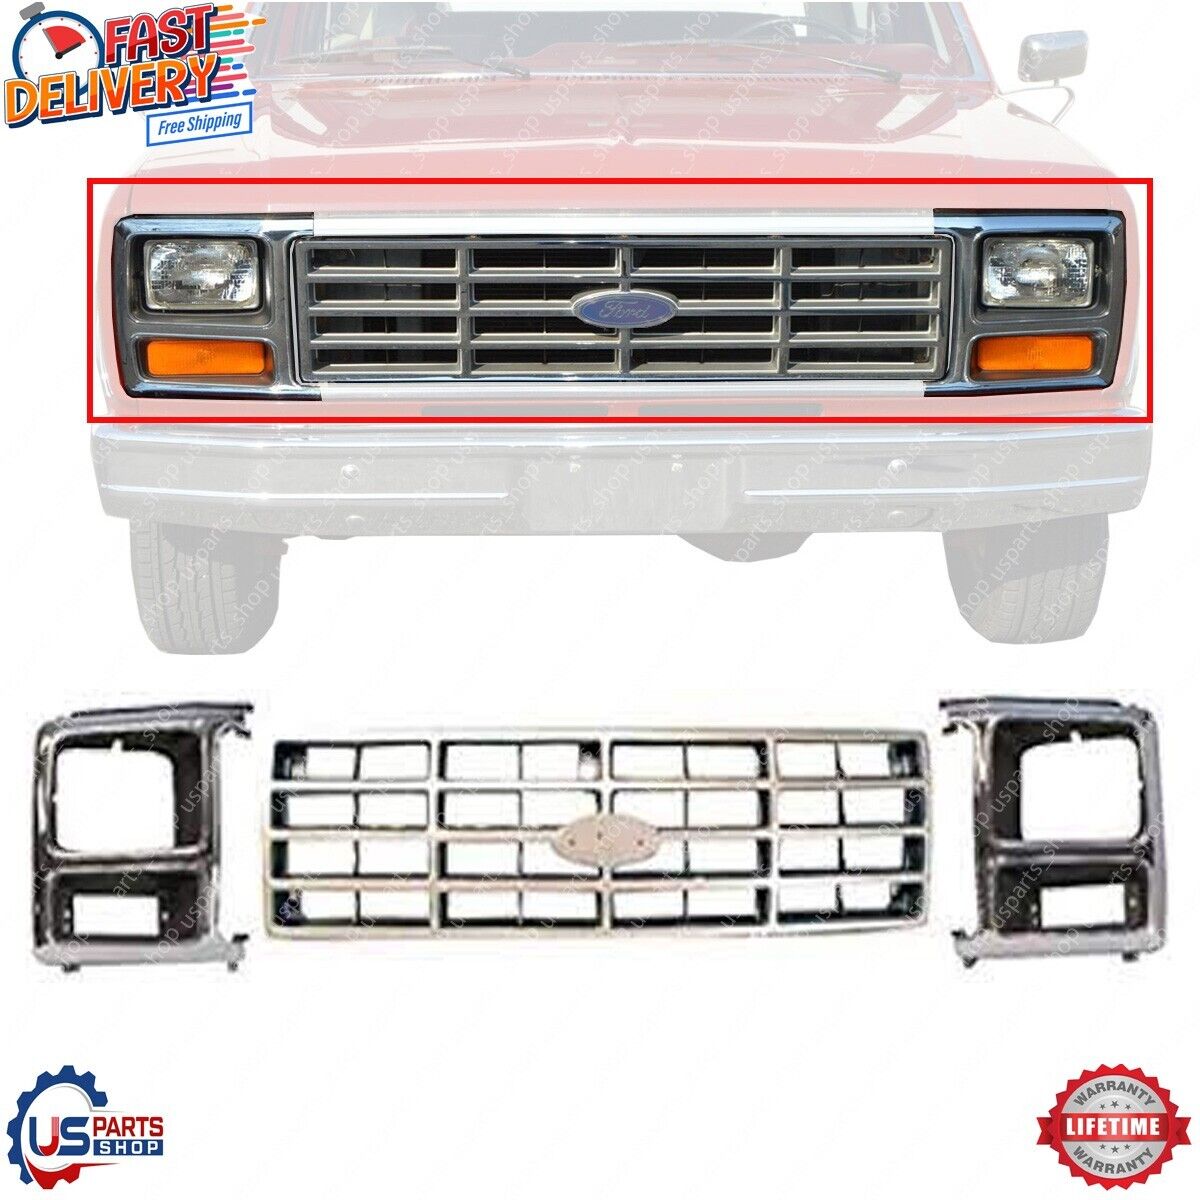 Front Grille + Headlight Bezel Trim Fits 1982-1986 Ford F-150 F-250 F-350 Bronco